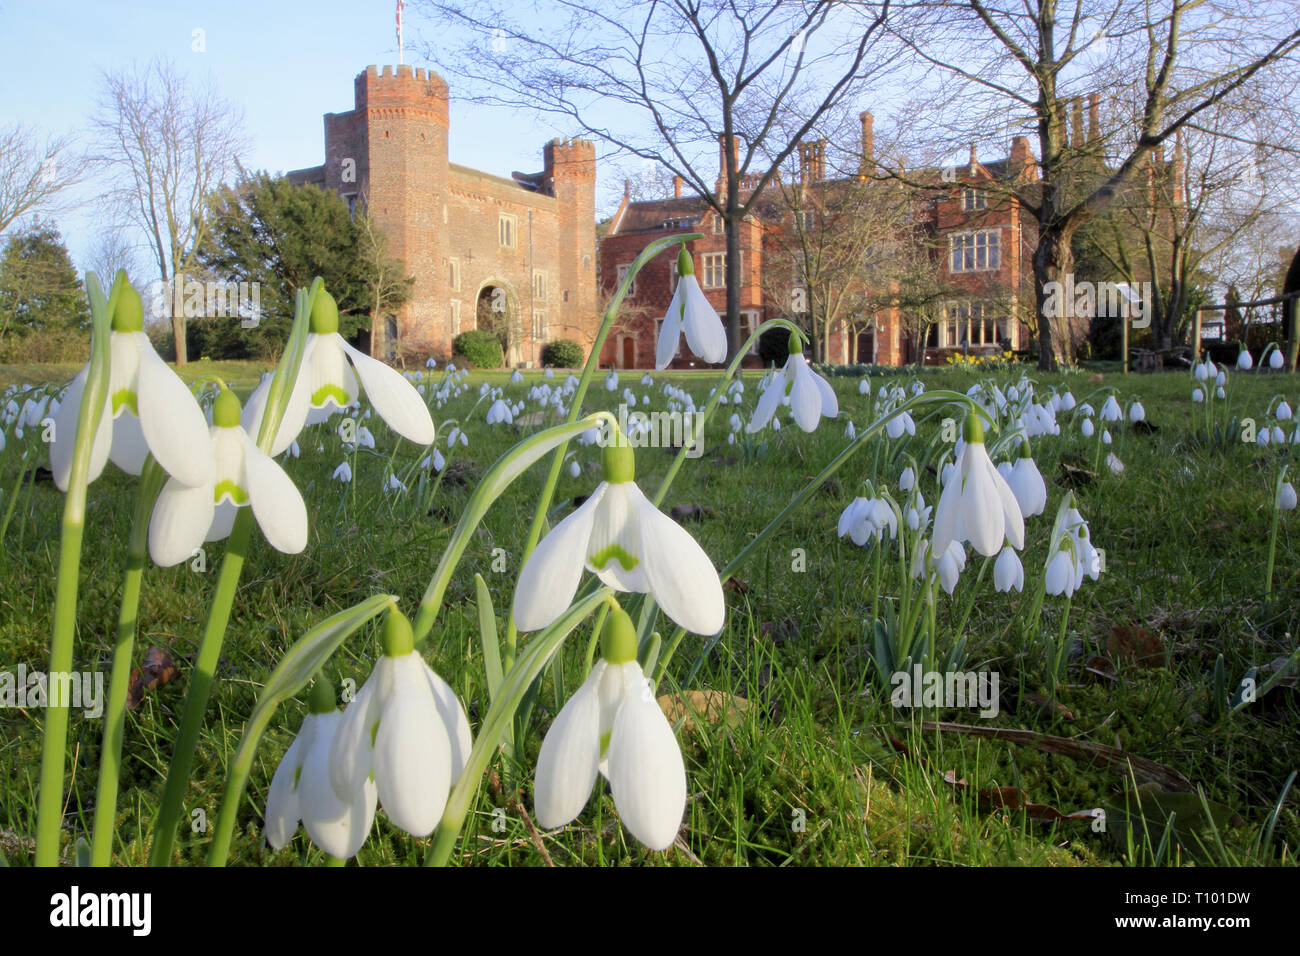 Hodsock Priory near Blyth, Nottinghamshire during their annual Snowdrop Week opening - February, UK, GB Stock Photo